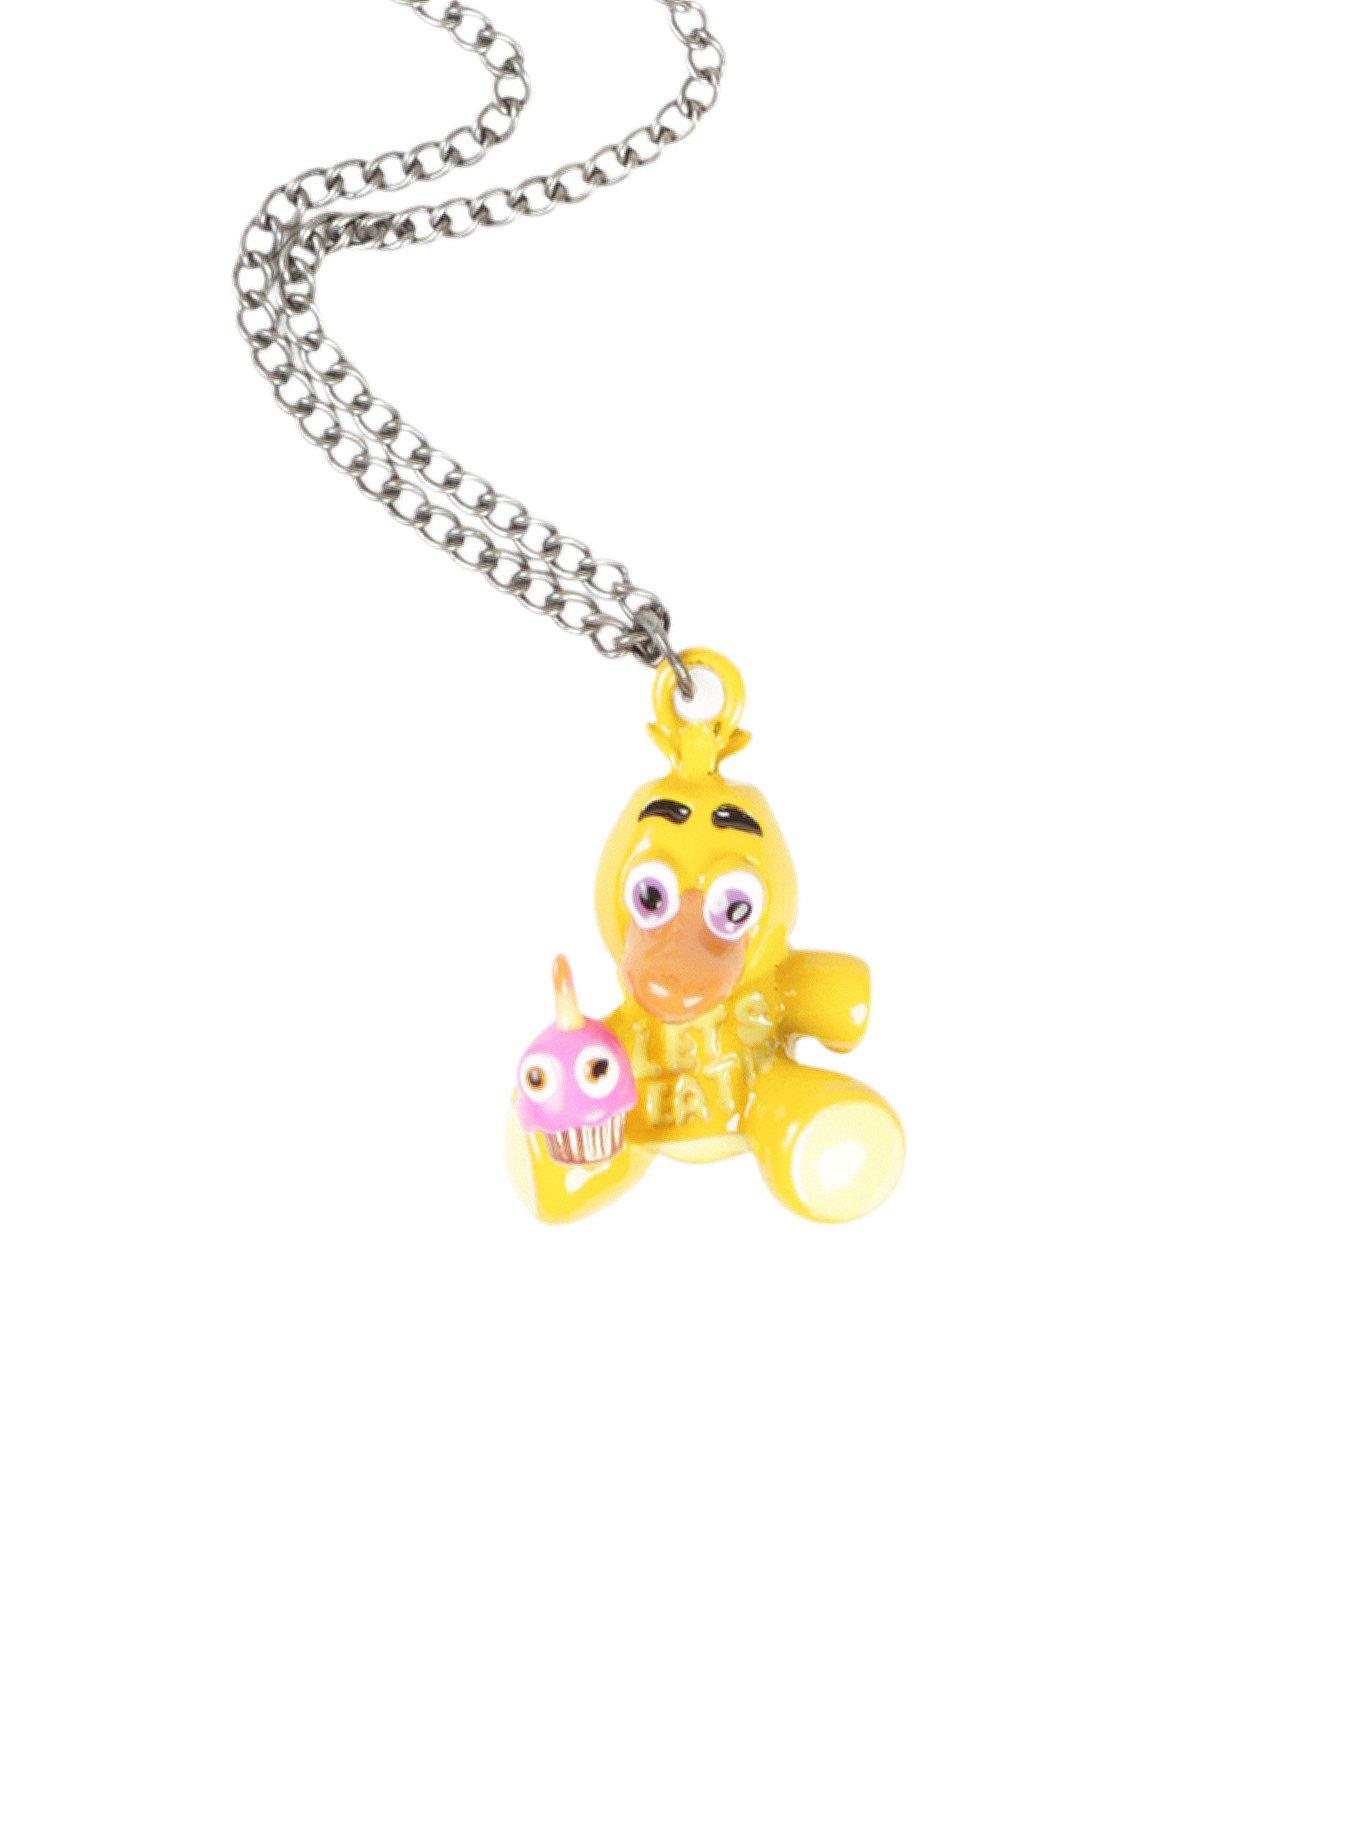 Hot Topic Five Nights At Freddy's Pizza Box Necklace